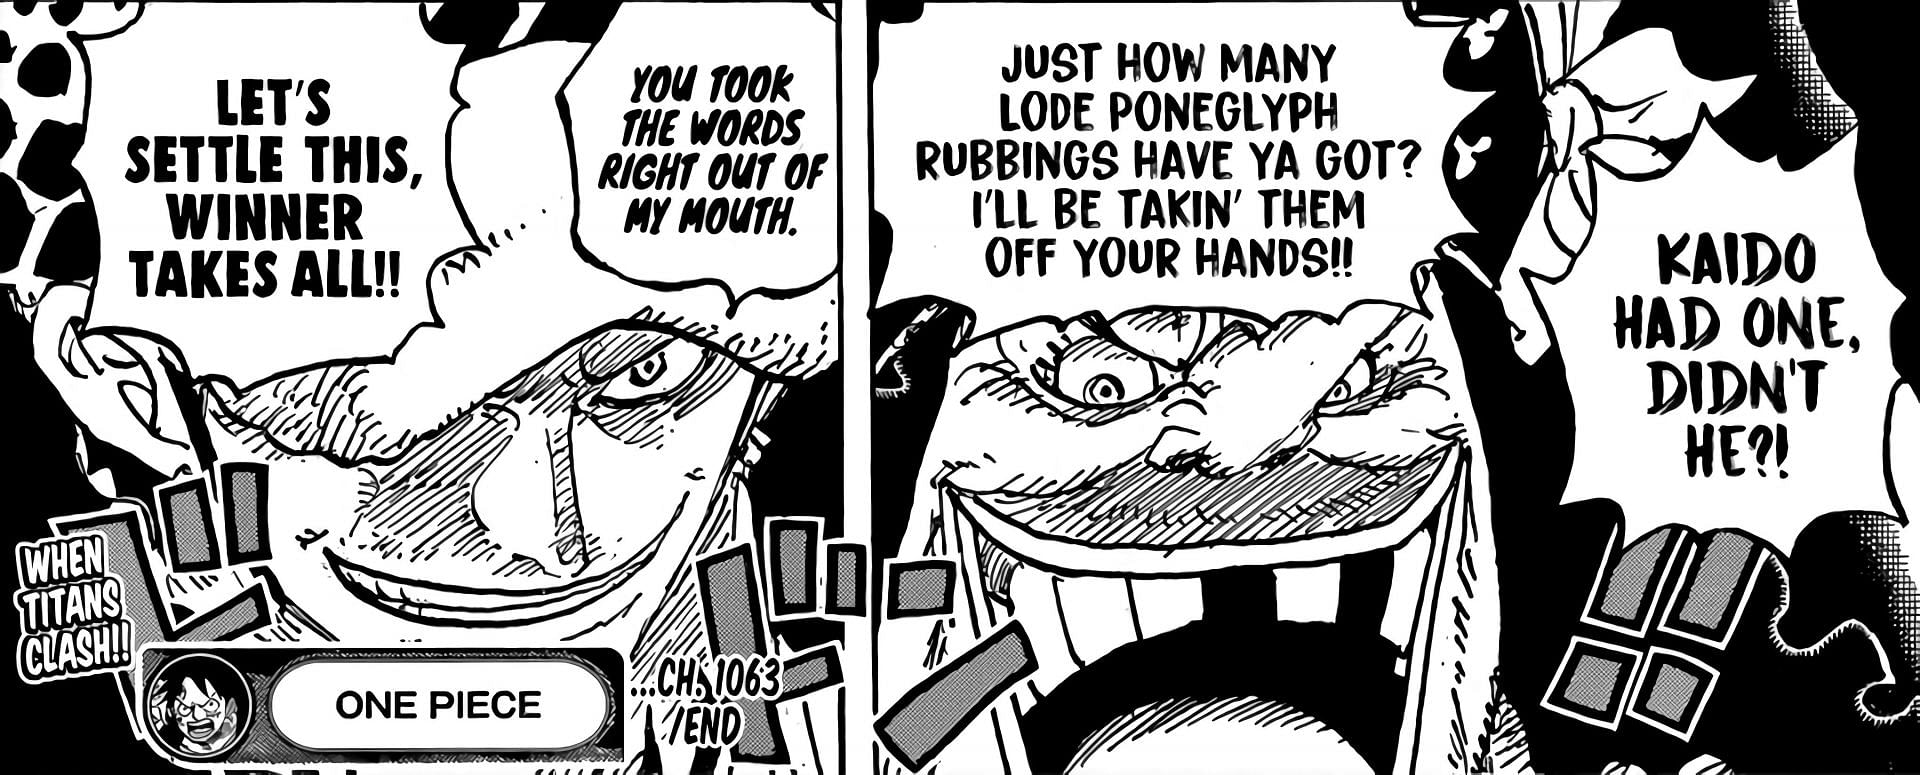 ONE PIECE SPOILERS on X: #ONEPIECE1065 Full summary of chapter